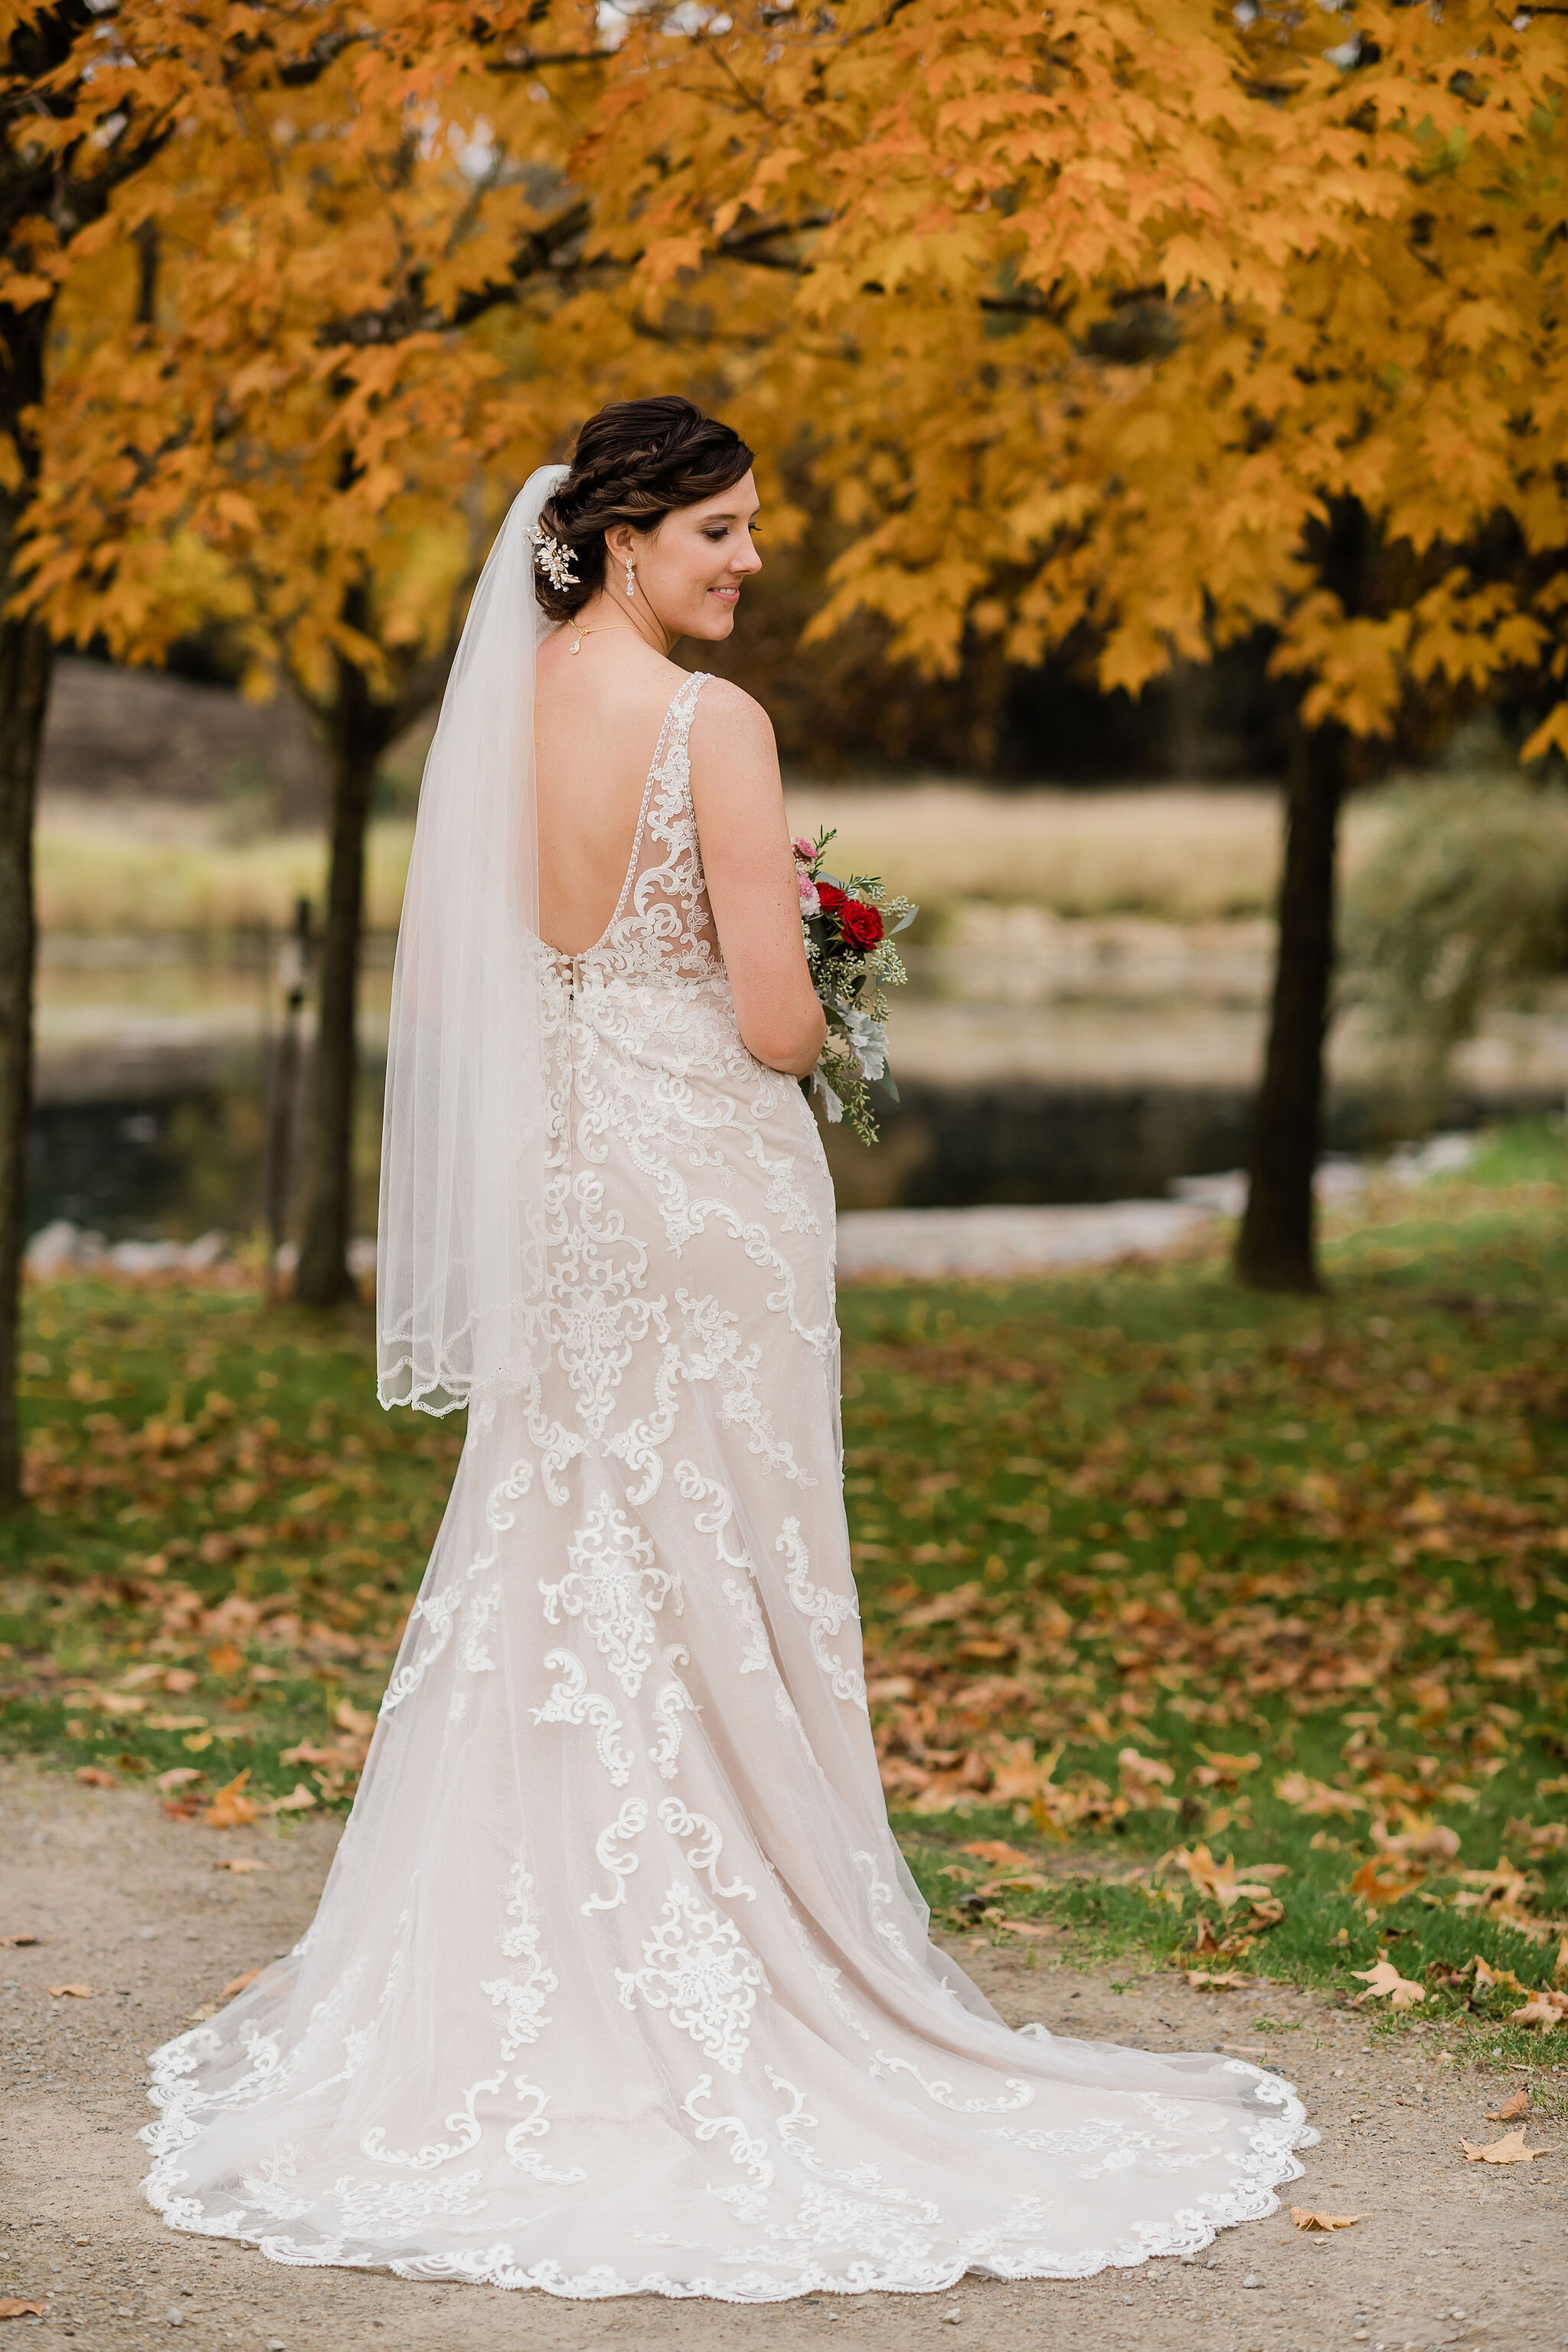 Back view of bride in her wedding dress